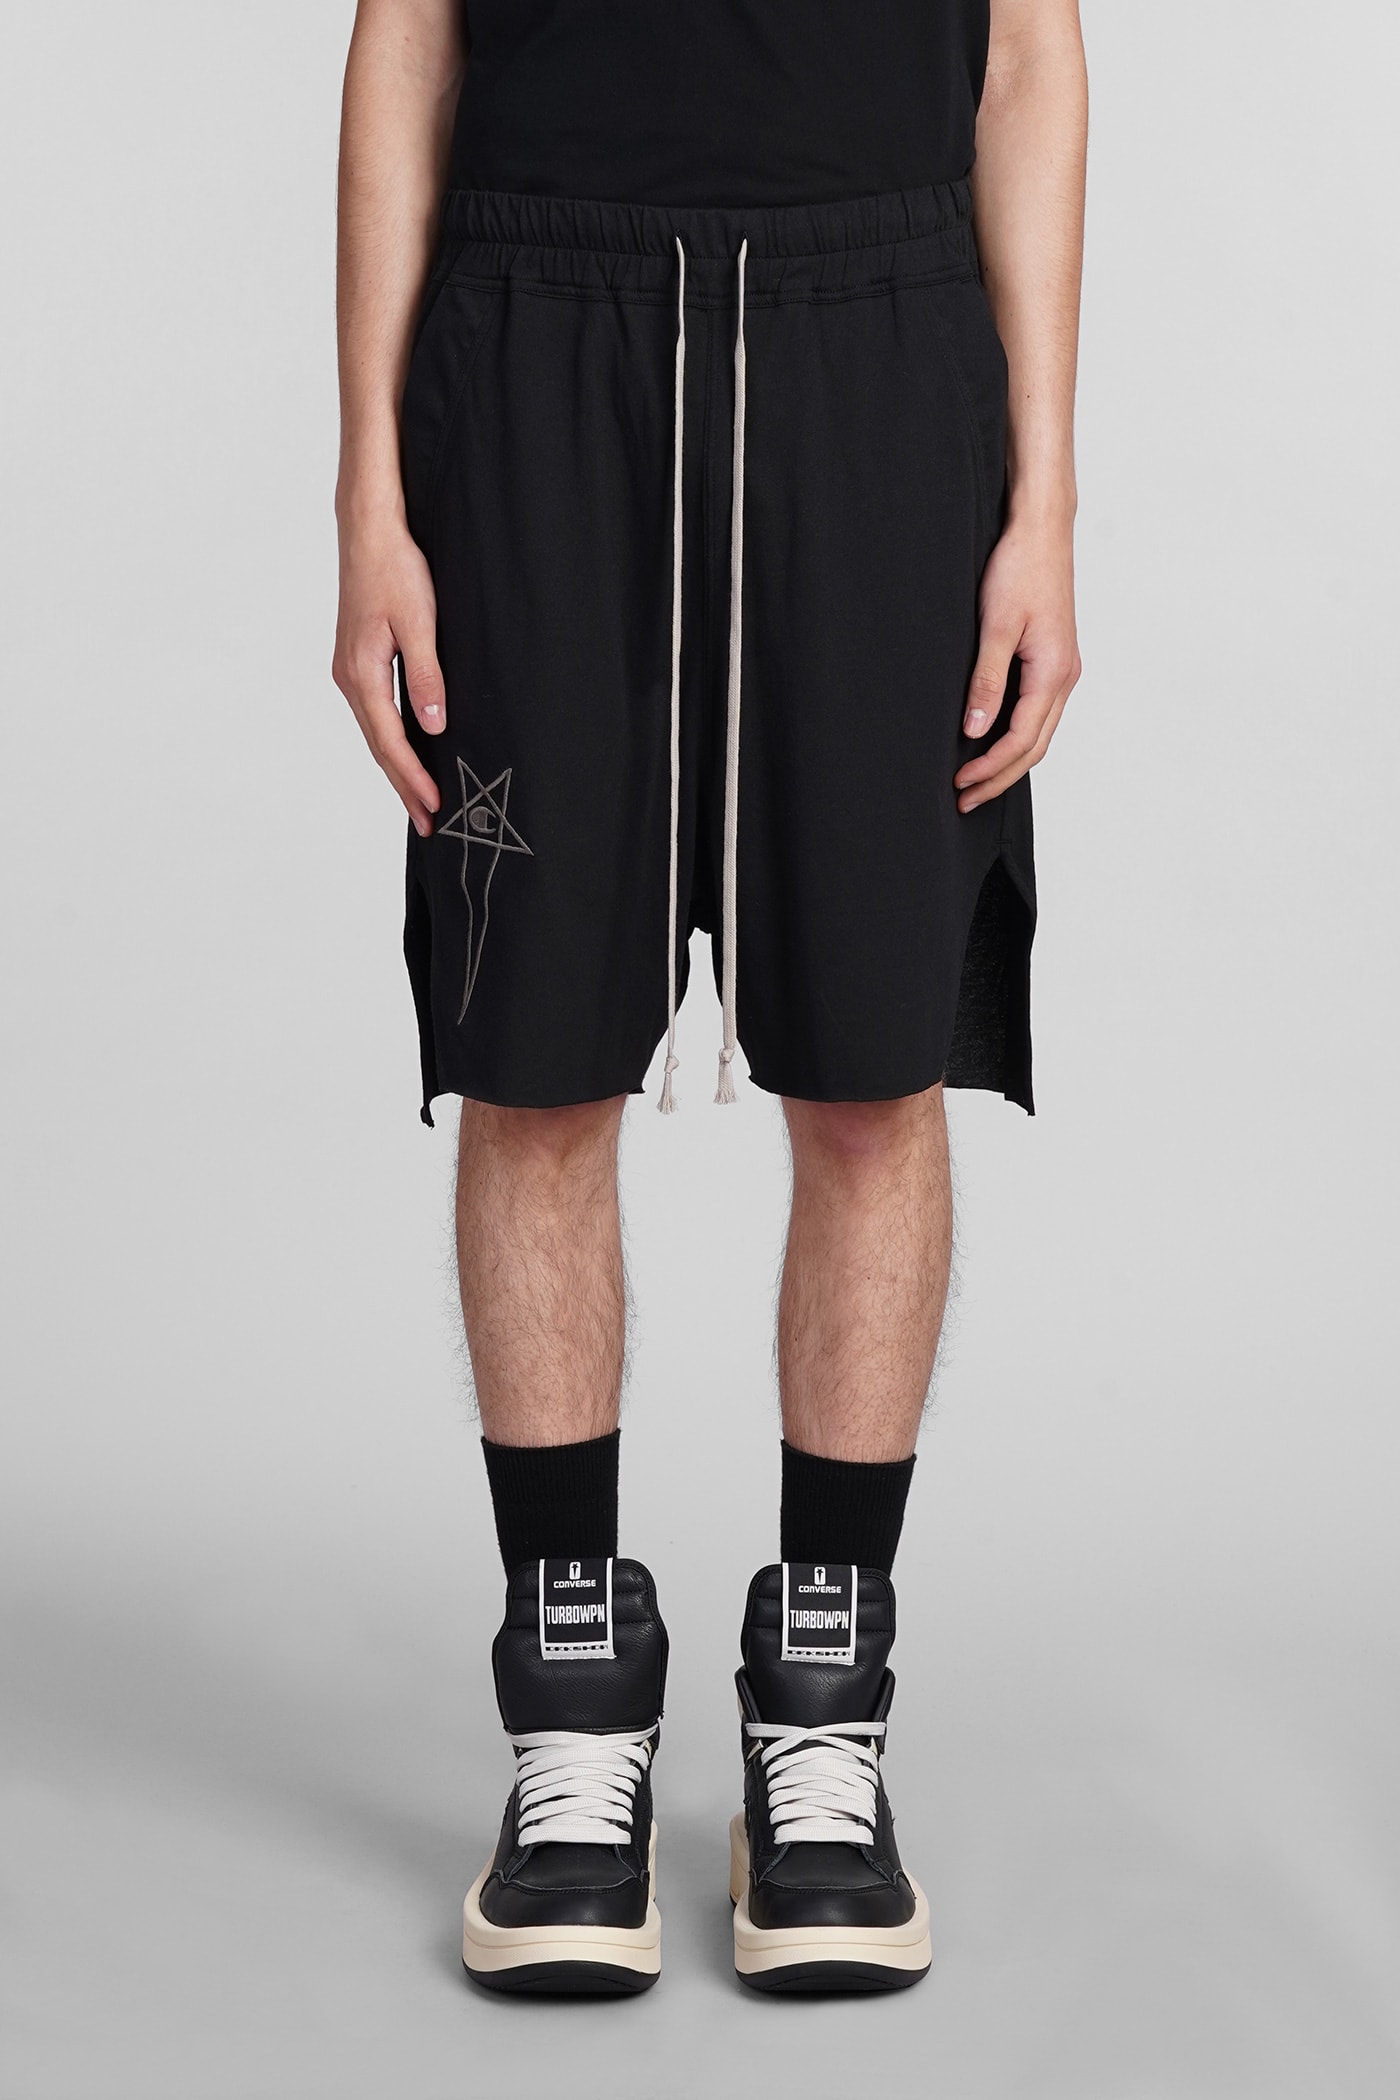 Beveled Pods Shorts In Black Cotton